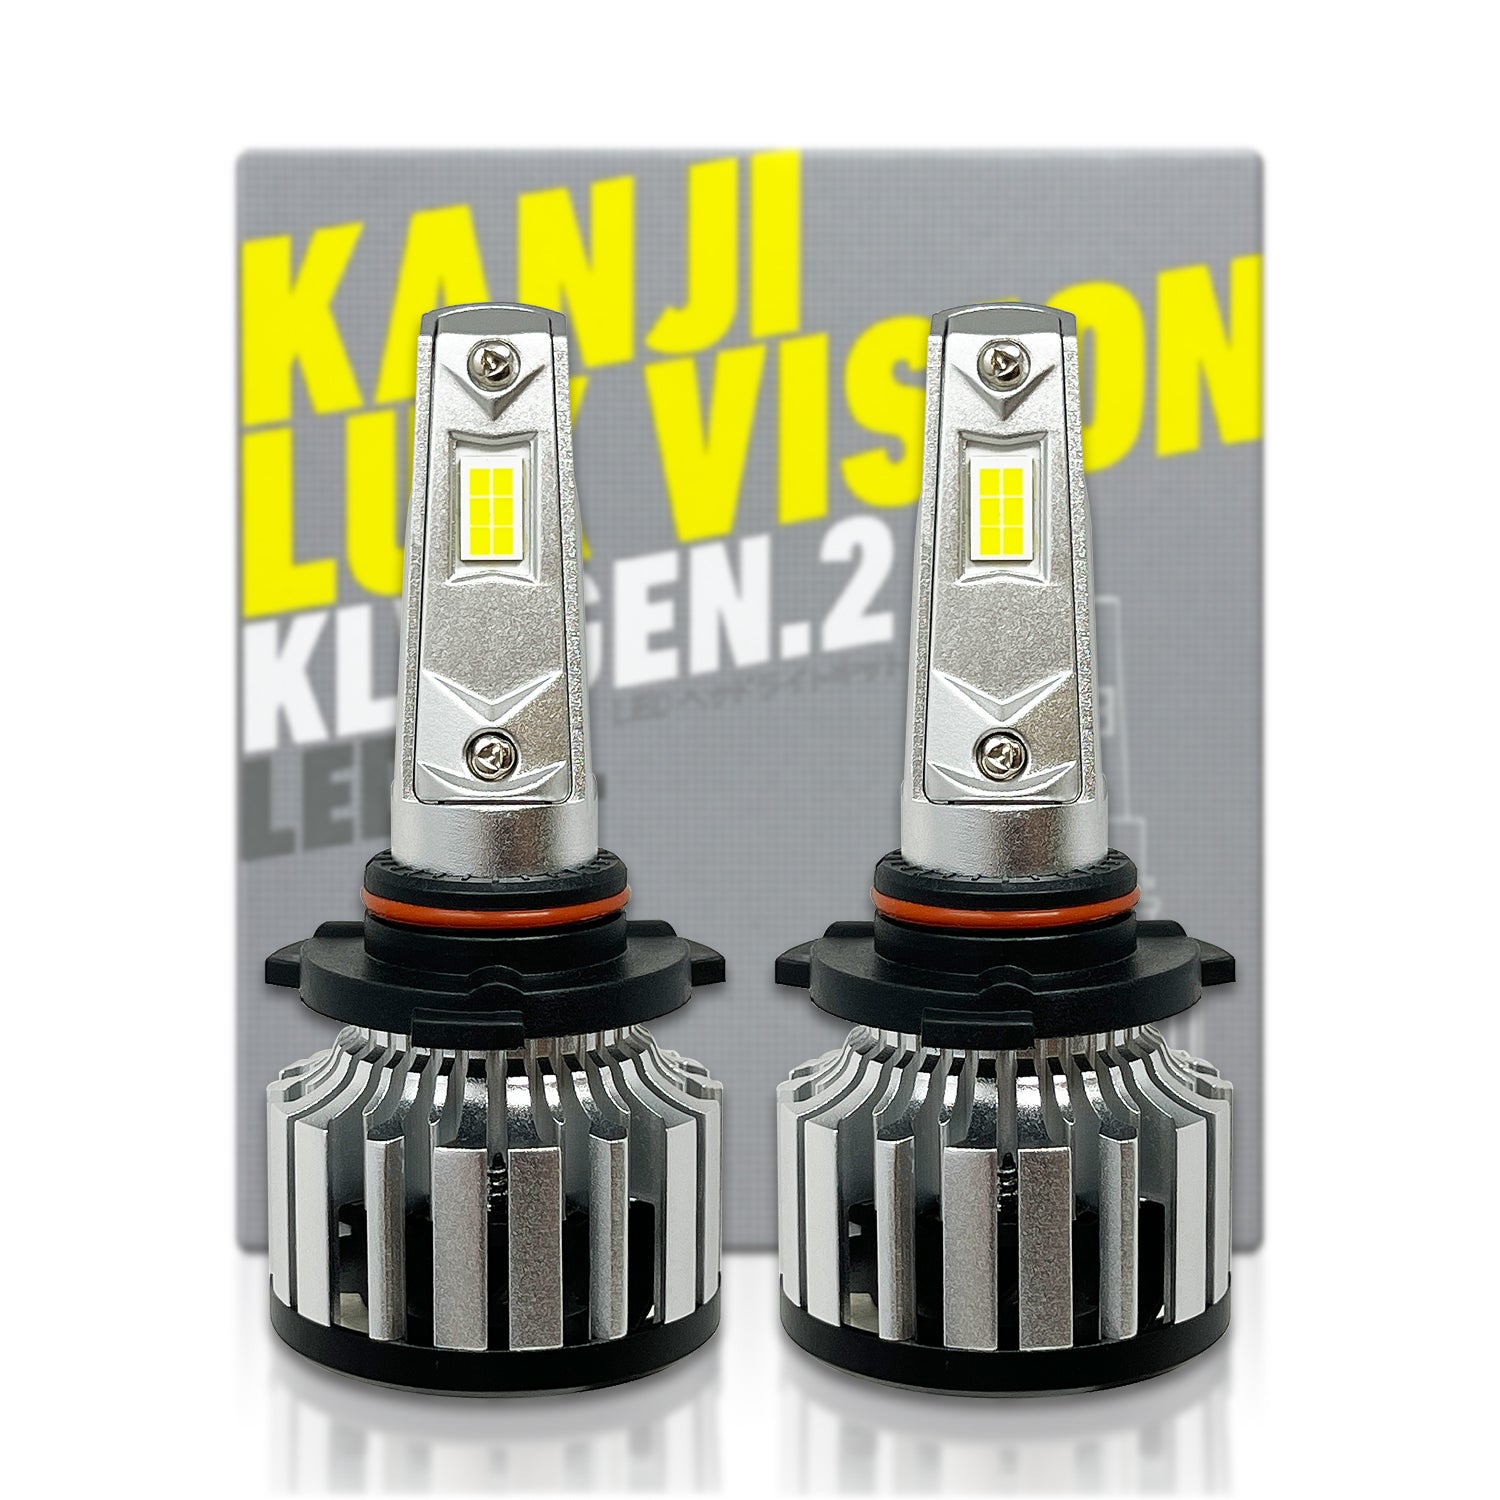 OSRAM introduces a new era of off-road LED replacement headlight bulbs